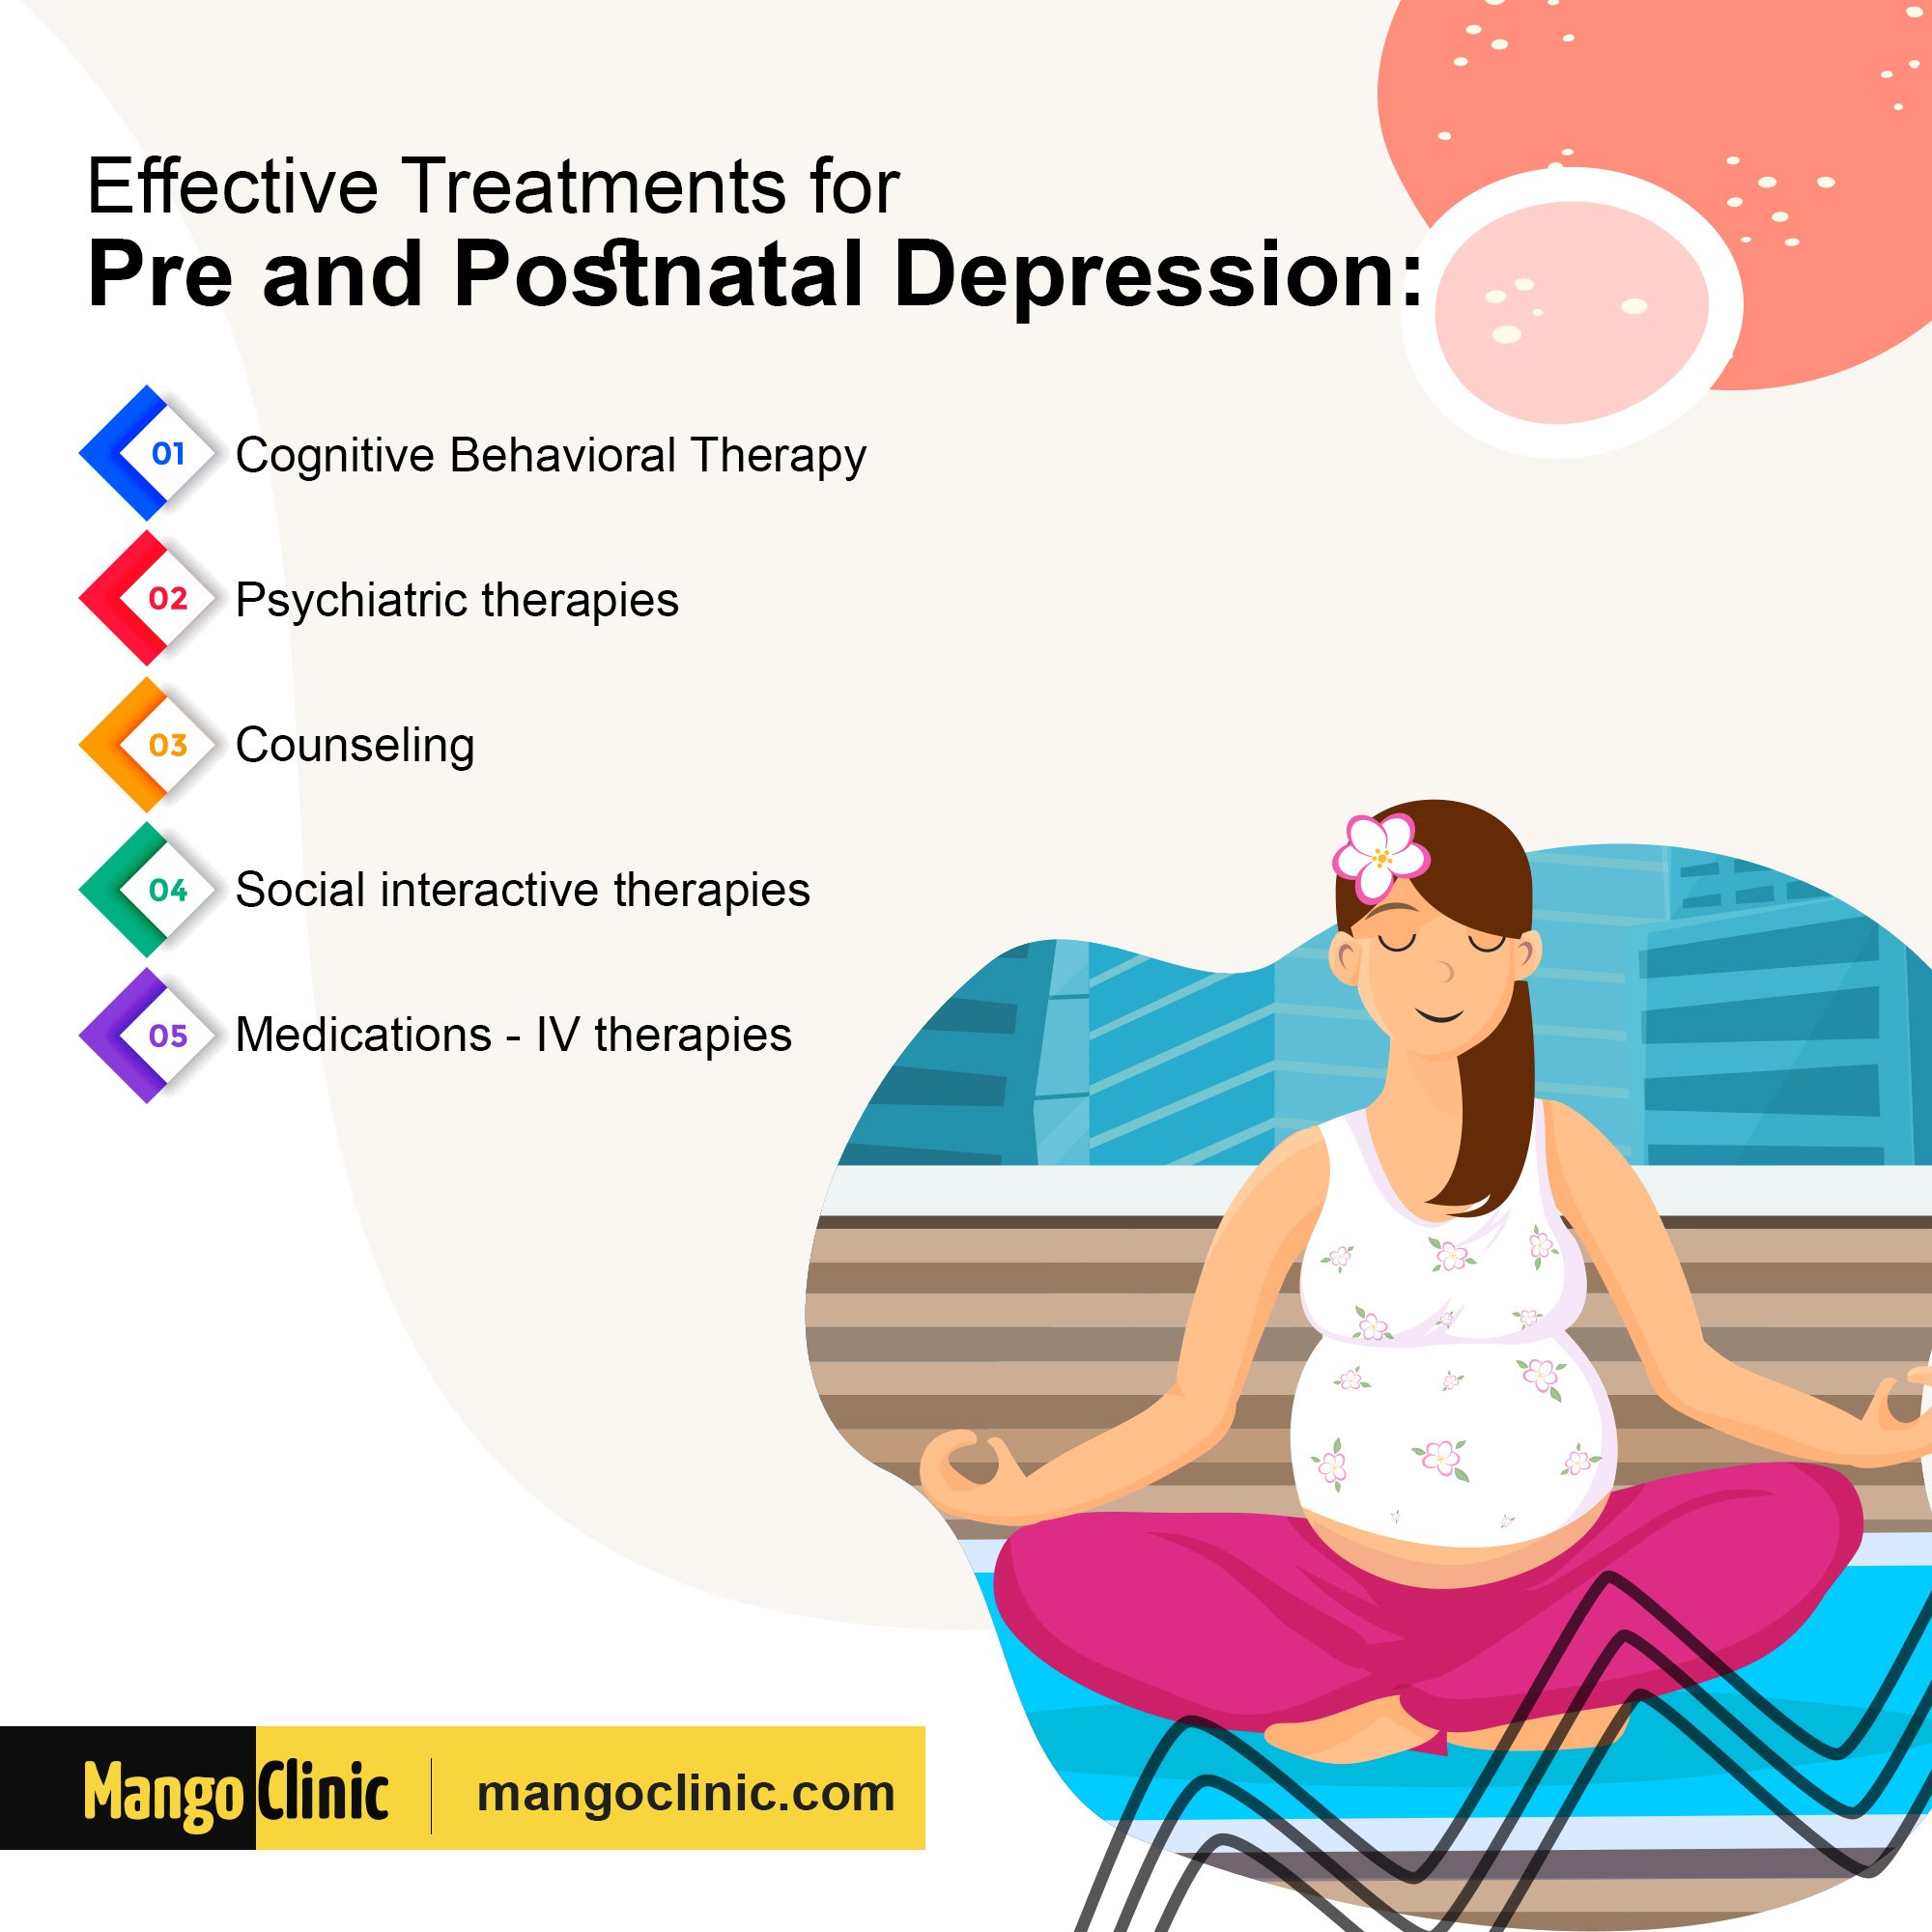 How to Deal with Depression During Pregnancy? Â· Mango Clinic